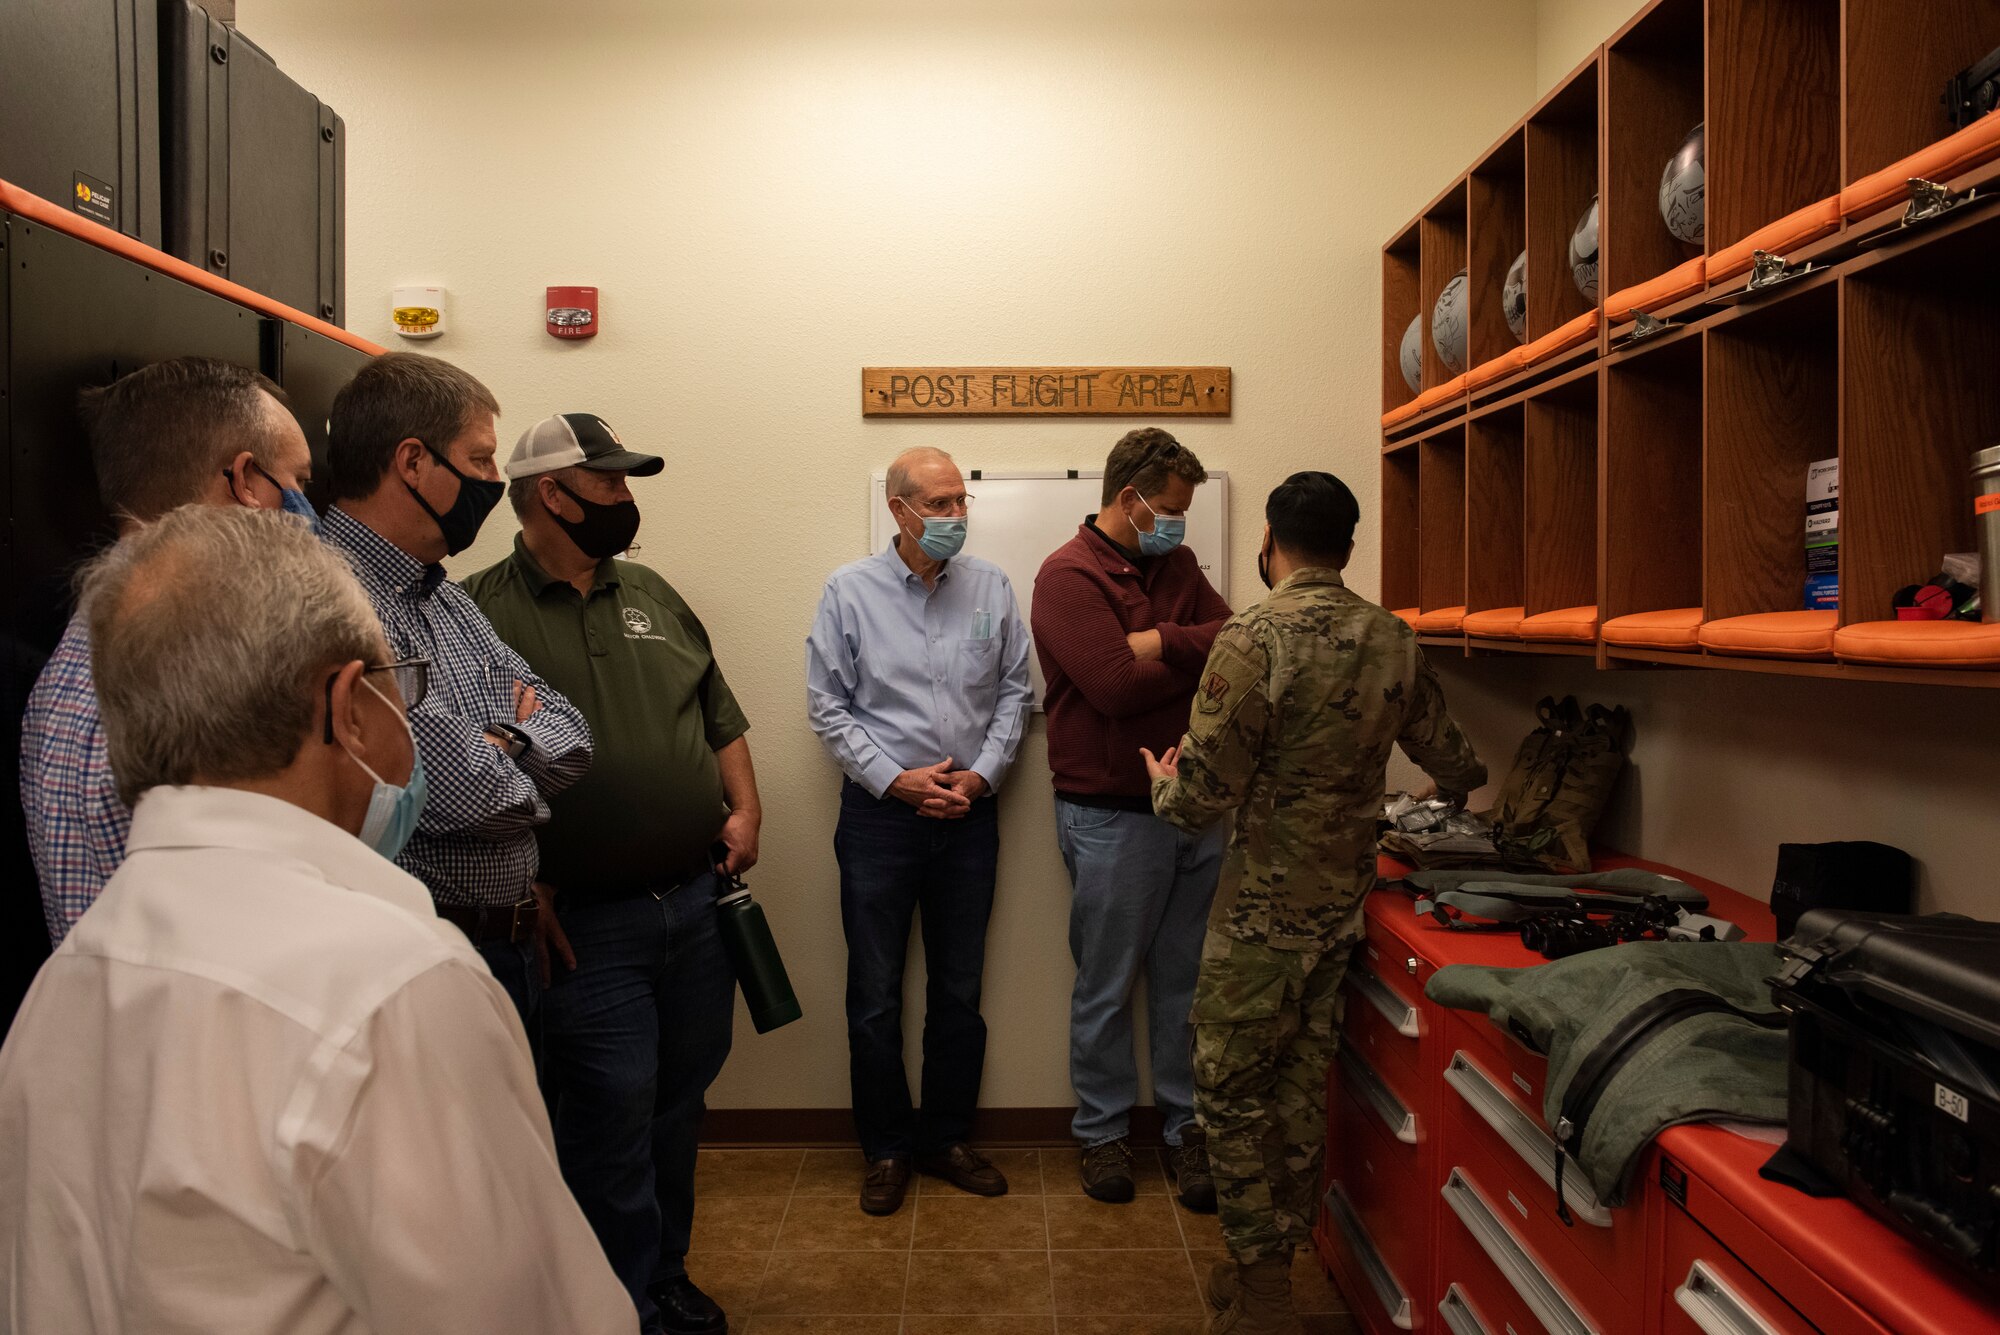 A U.S. Air Force Airman from the 391st Fighter Squadron educates community leaders on Aircrew Flight Equipment during a Treasure Valley Partnership tour on Mountain Home Air Force Base, Idaho, Sept. 9, 2021. The tour showcased the importance of our mission here to build strong relationships within the community.